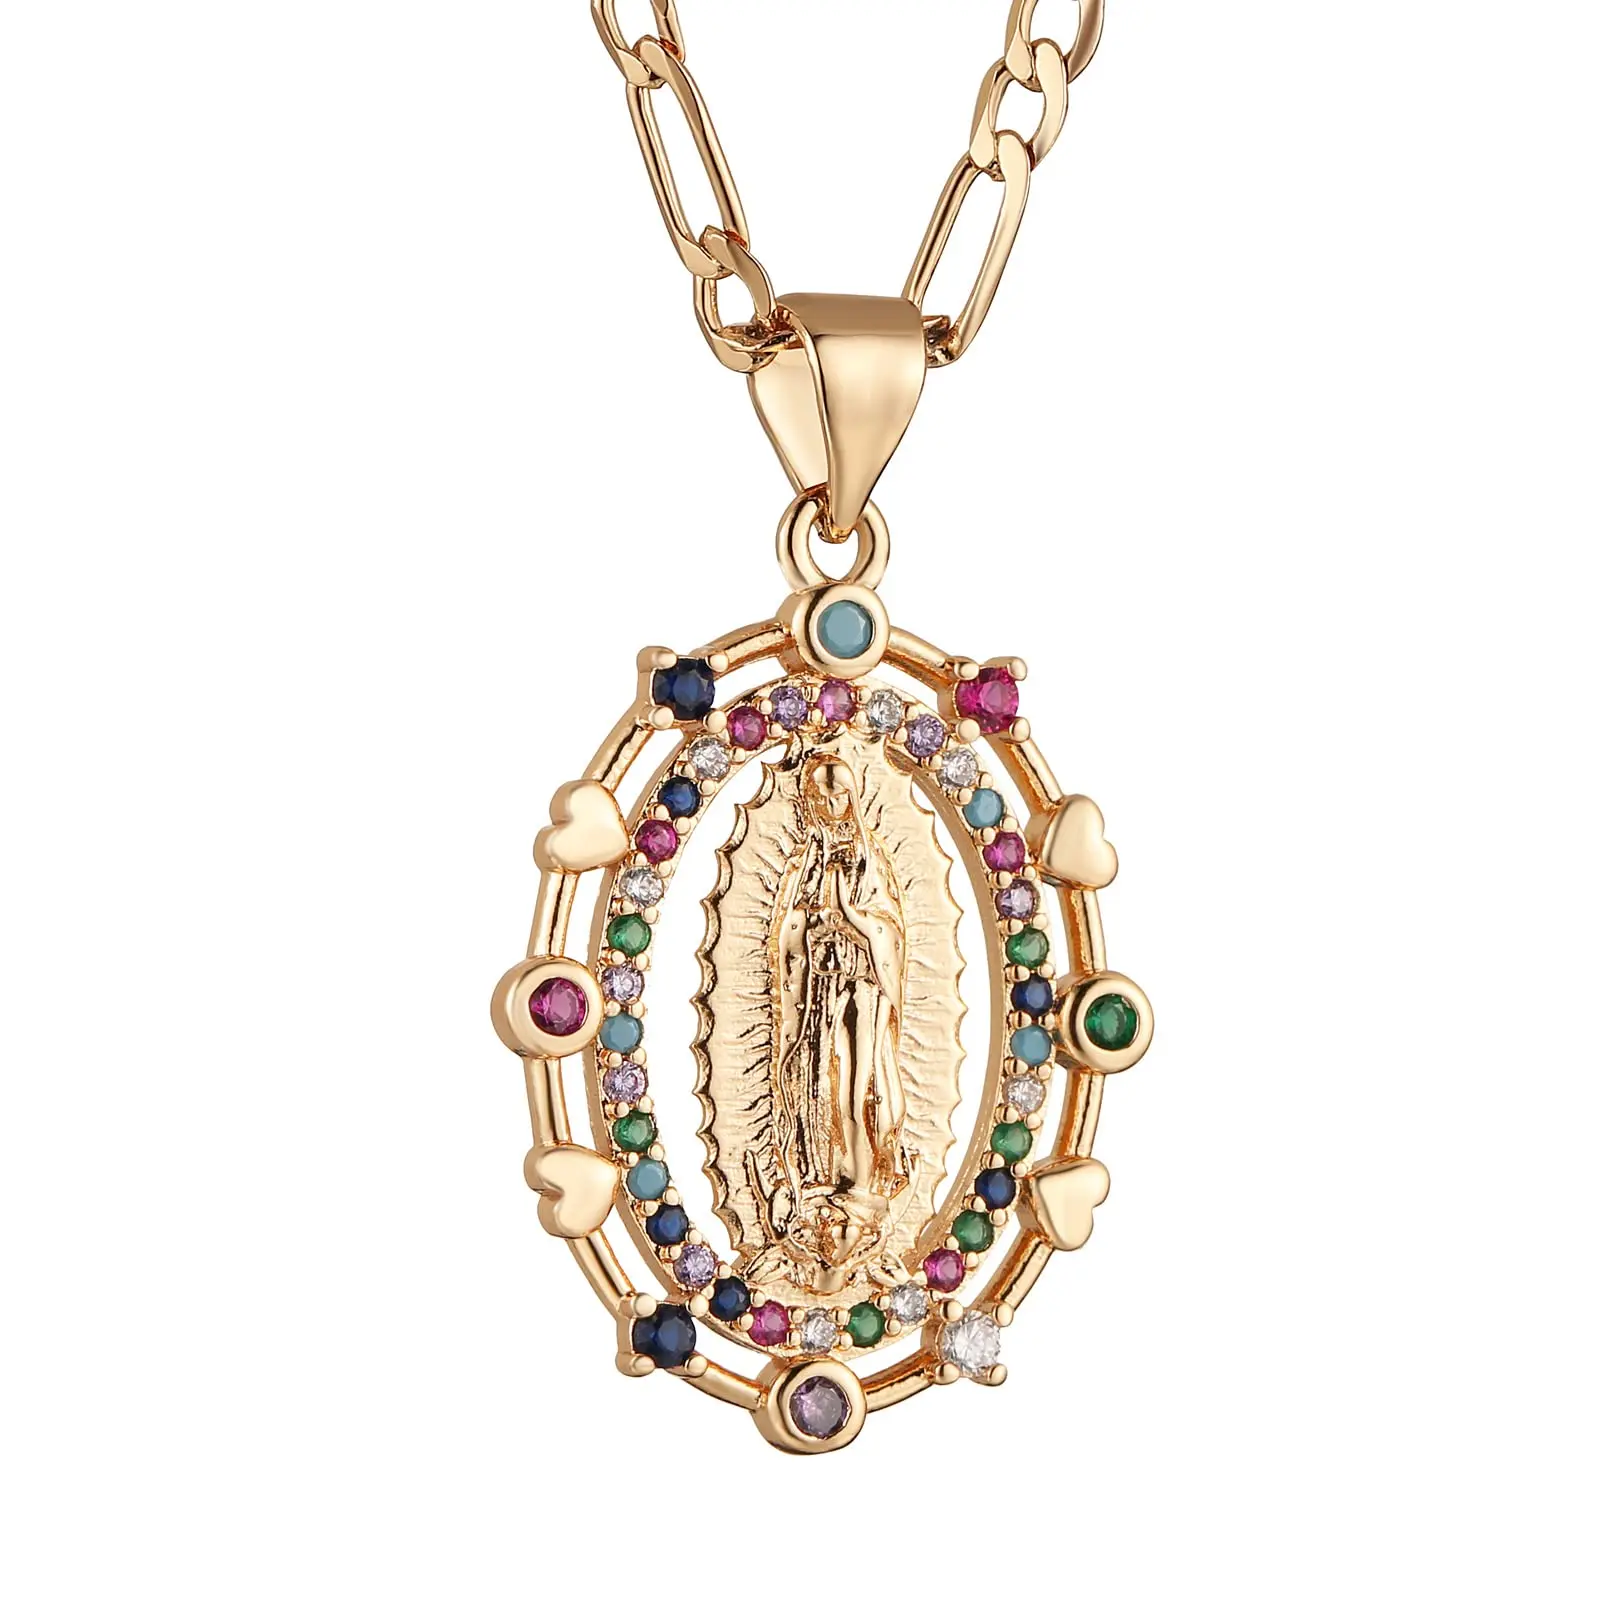 

HZMAN 14K Gold Plated Virgin Mary Prayer Necklace Amulet Our Lady of Guadalupe Pendant Cubic Zirconia for Women Daughter Gift